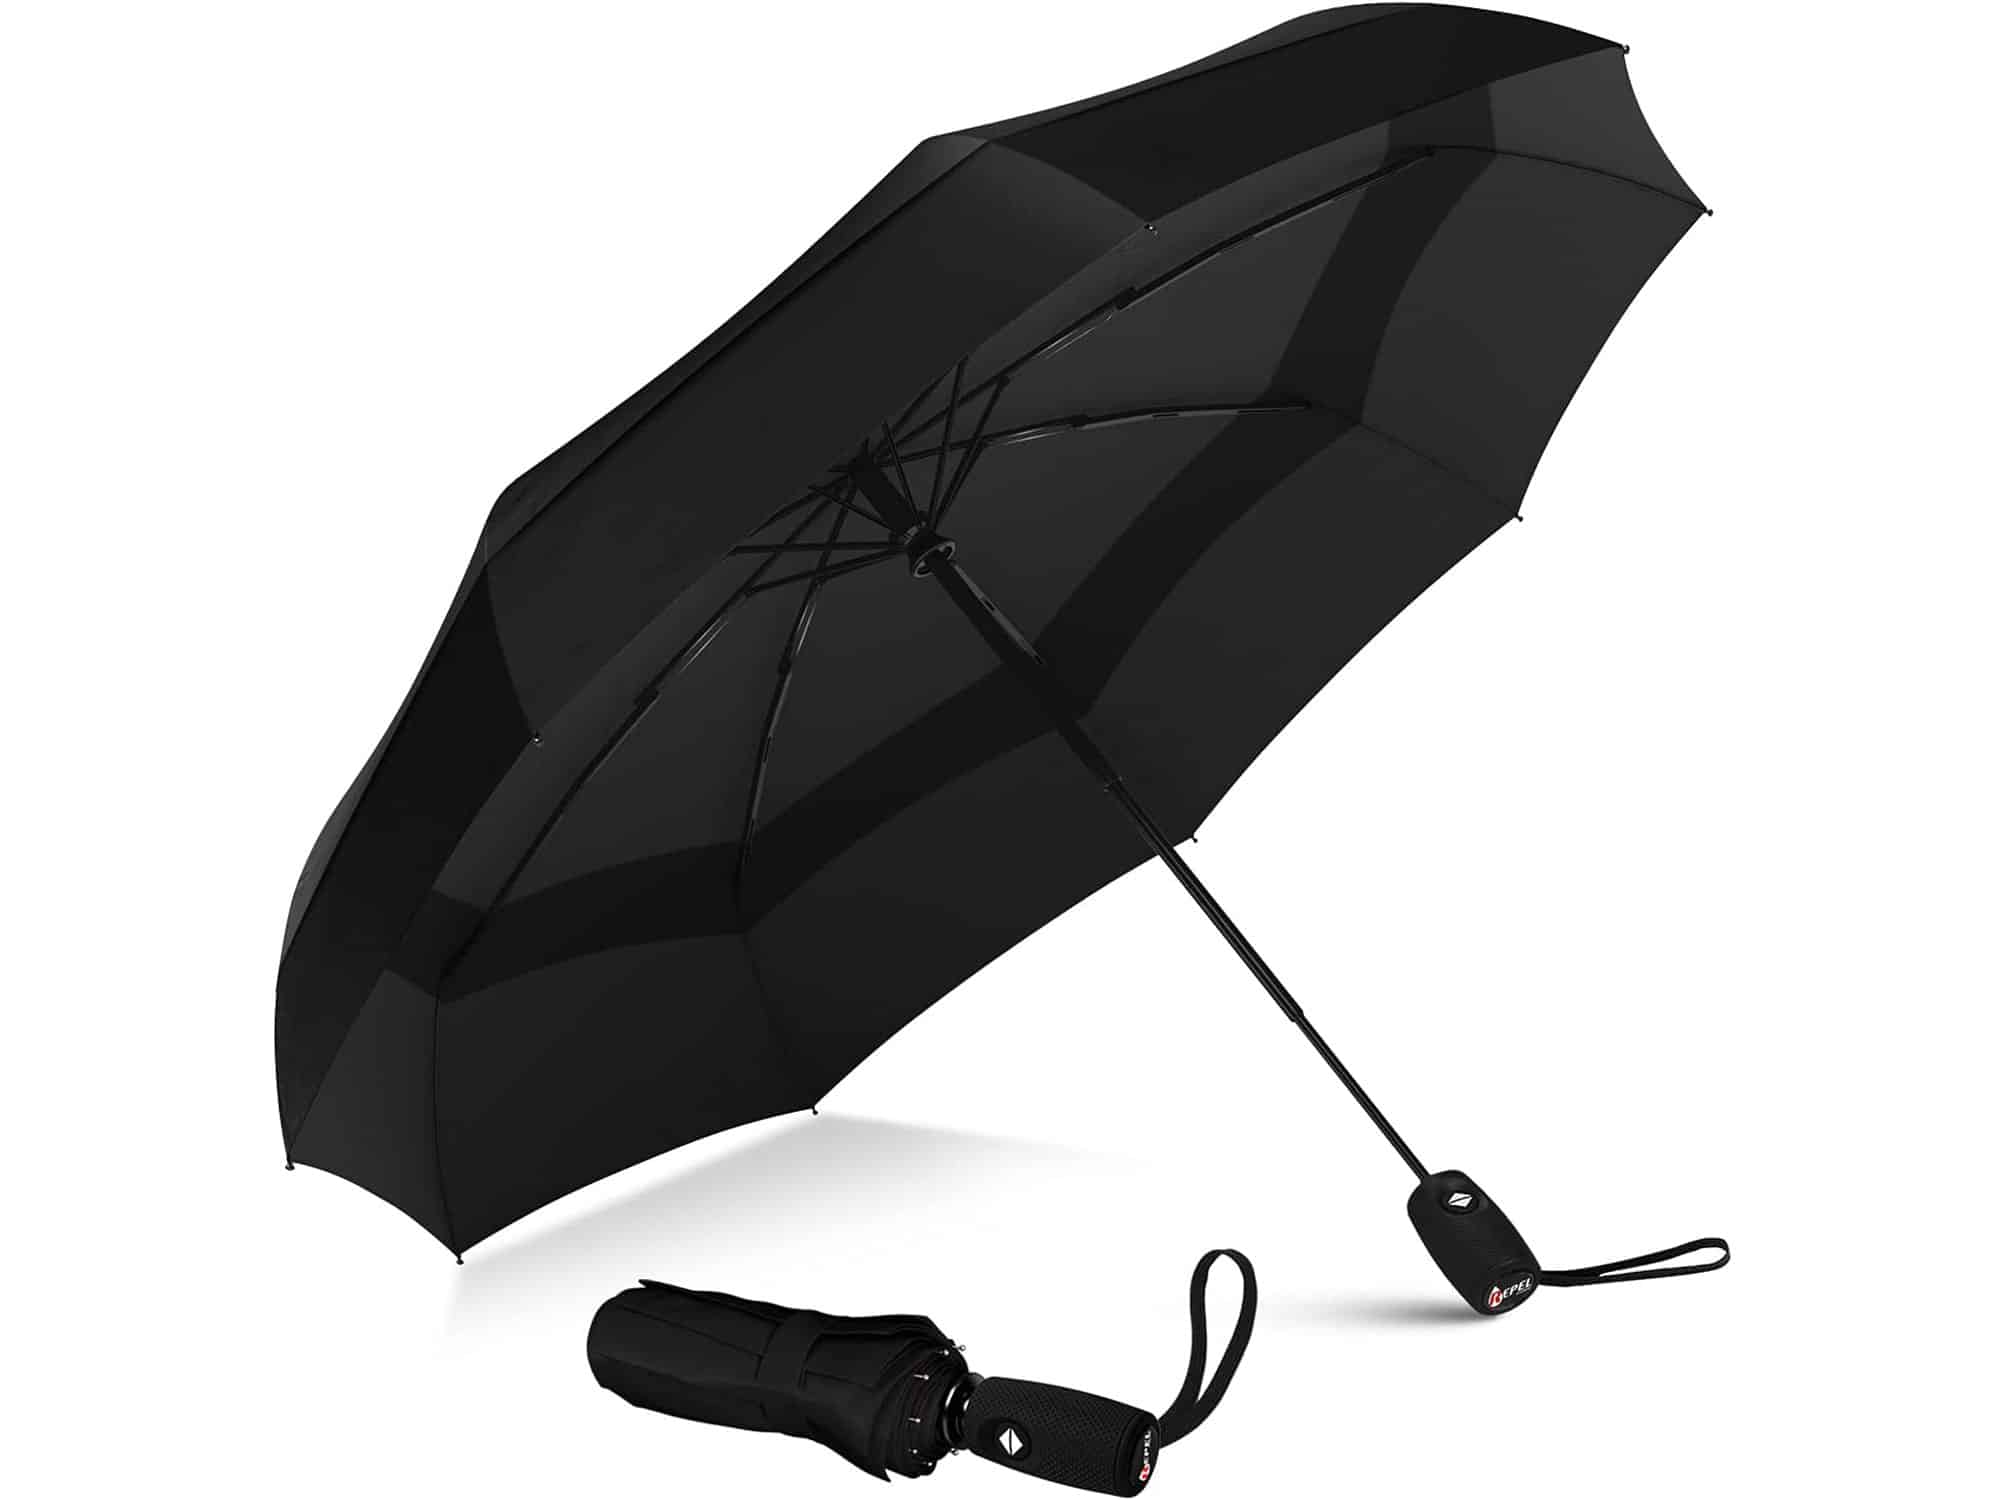 Repel Umbrella Windproof Travel Umbrella - Compact, Light, Automatic, Strong and Portable - Wind Resistant, Small Folding Backpack Umbrella for Rain - Men and Women